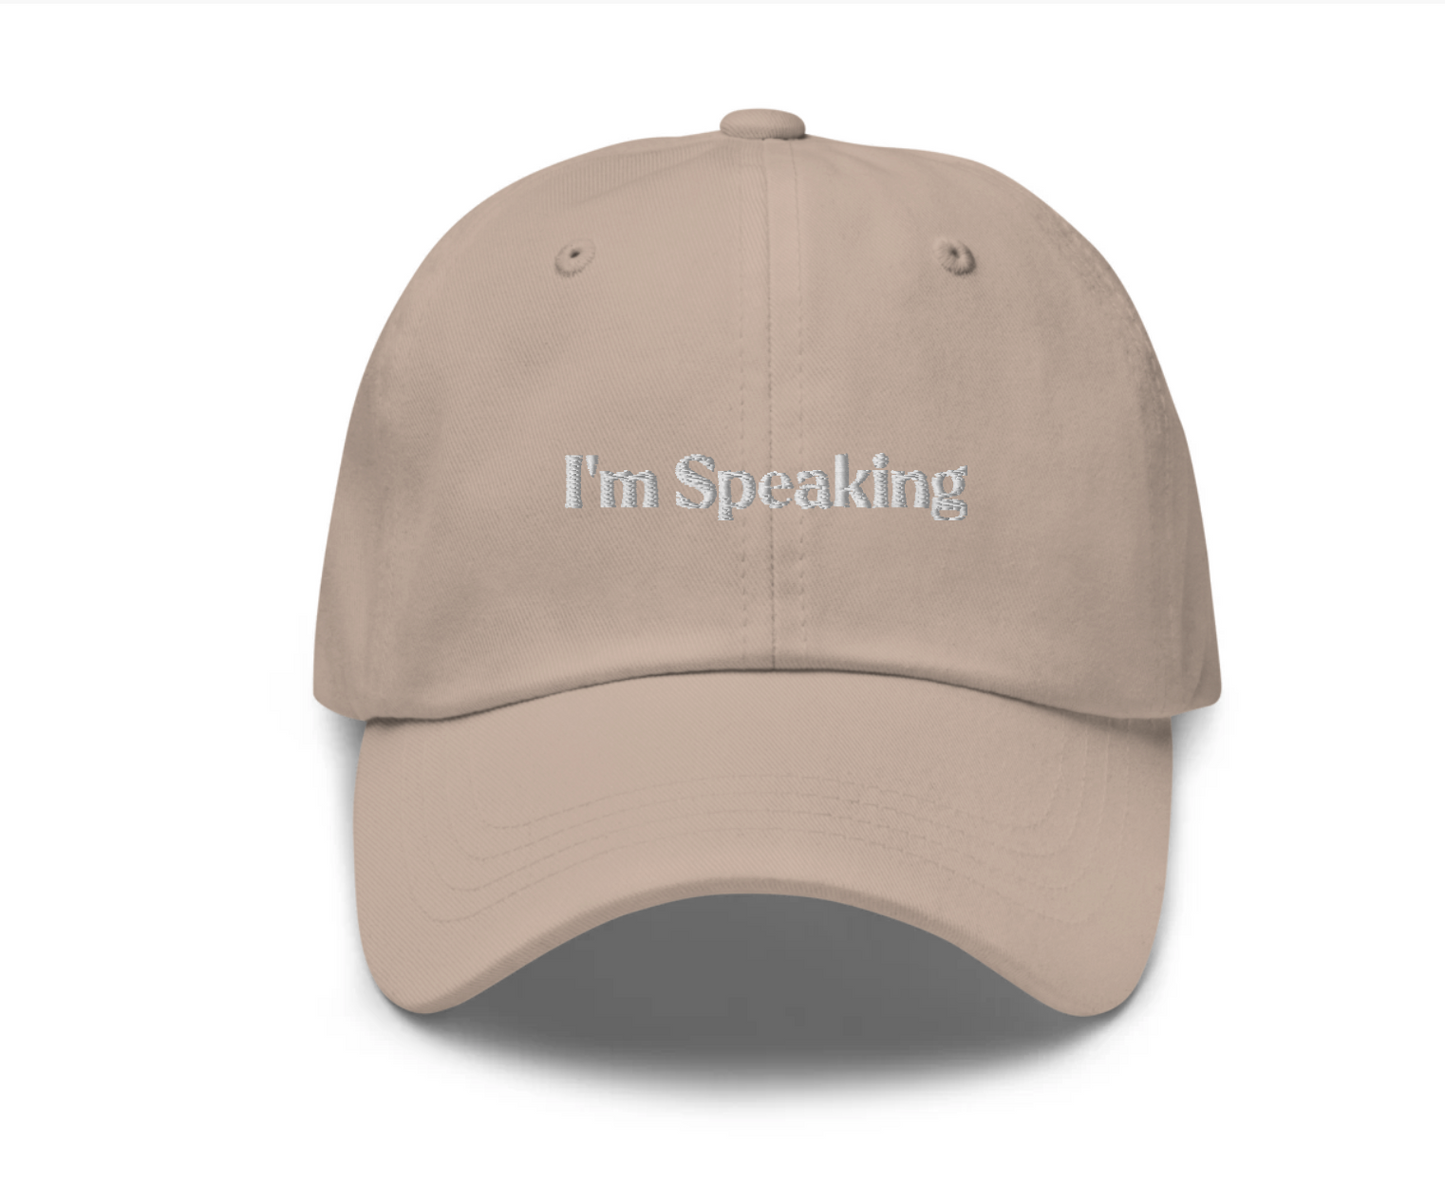 I'm Speaking Embroidered Dad Hat (2 colors available)